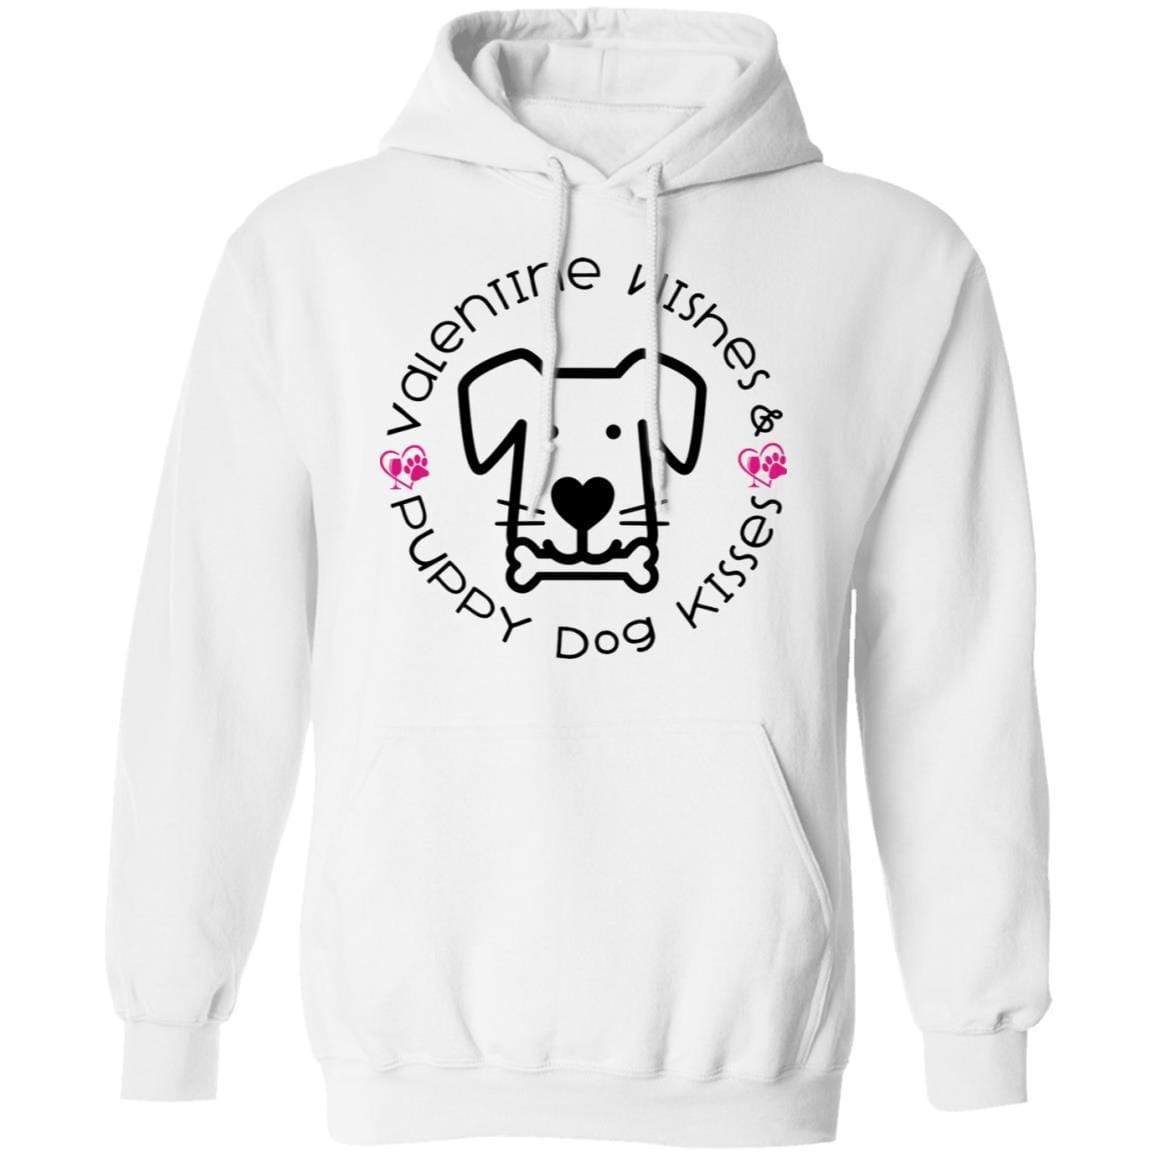 Sweatshirts White / S Winey Bitches Co Valentine Wishes and Puppy Dog Kisses" (Dog) Pullover Hoodie 8 oz. WineyBitchesCo